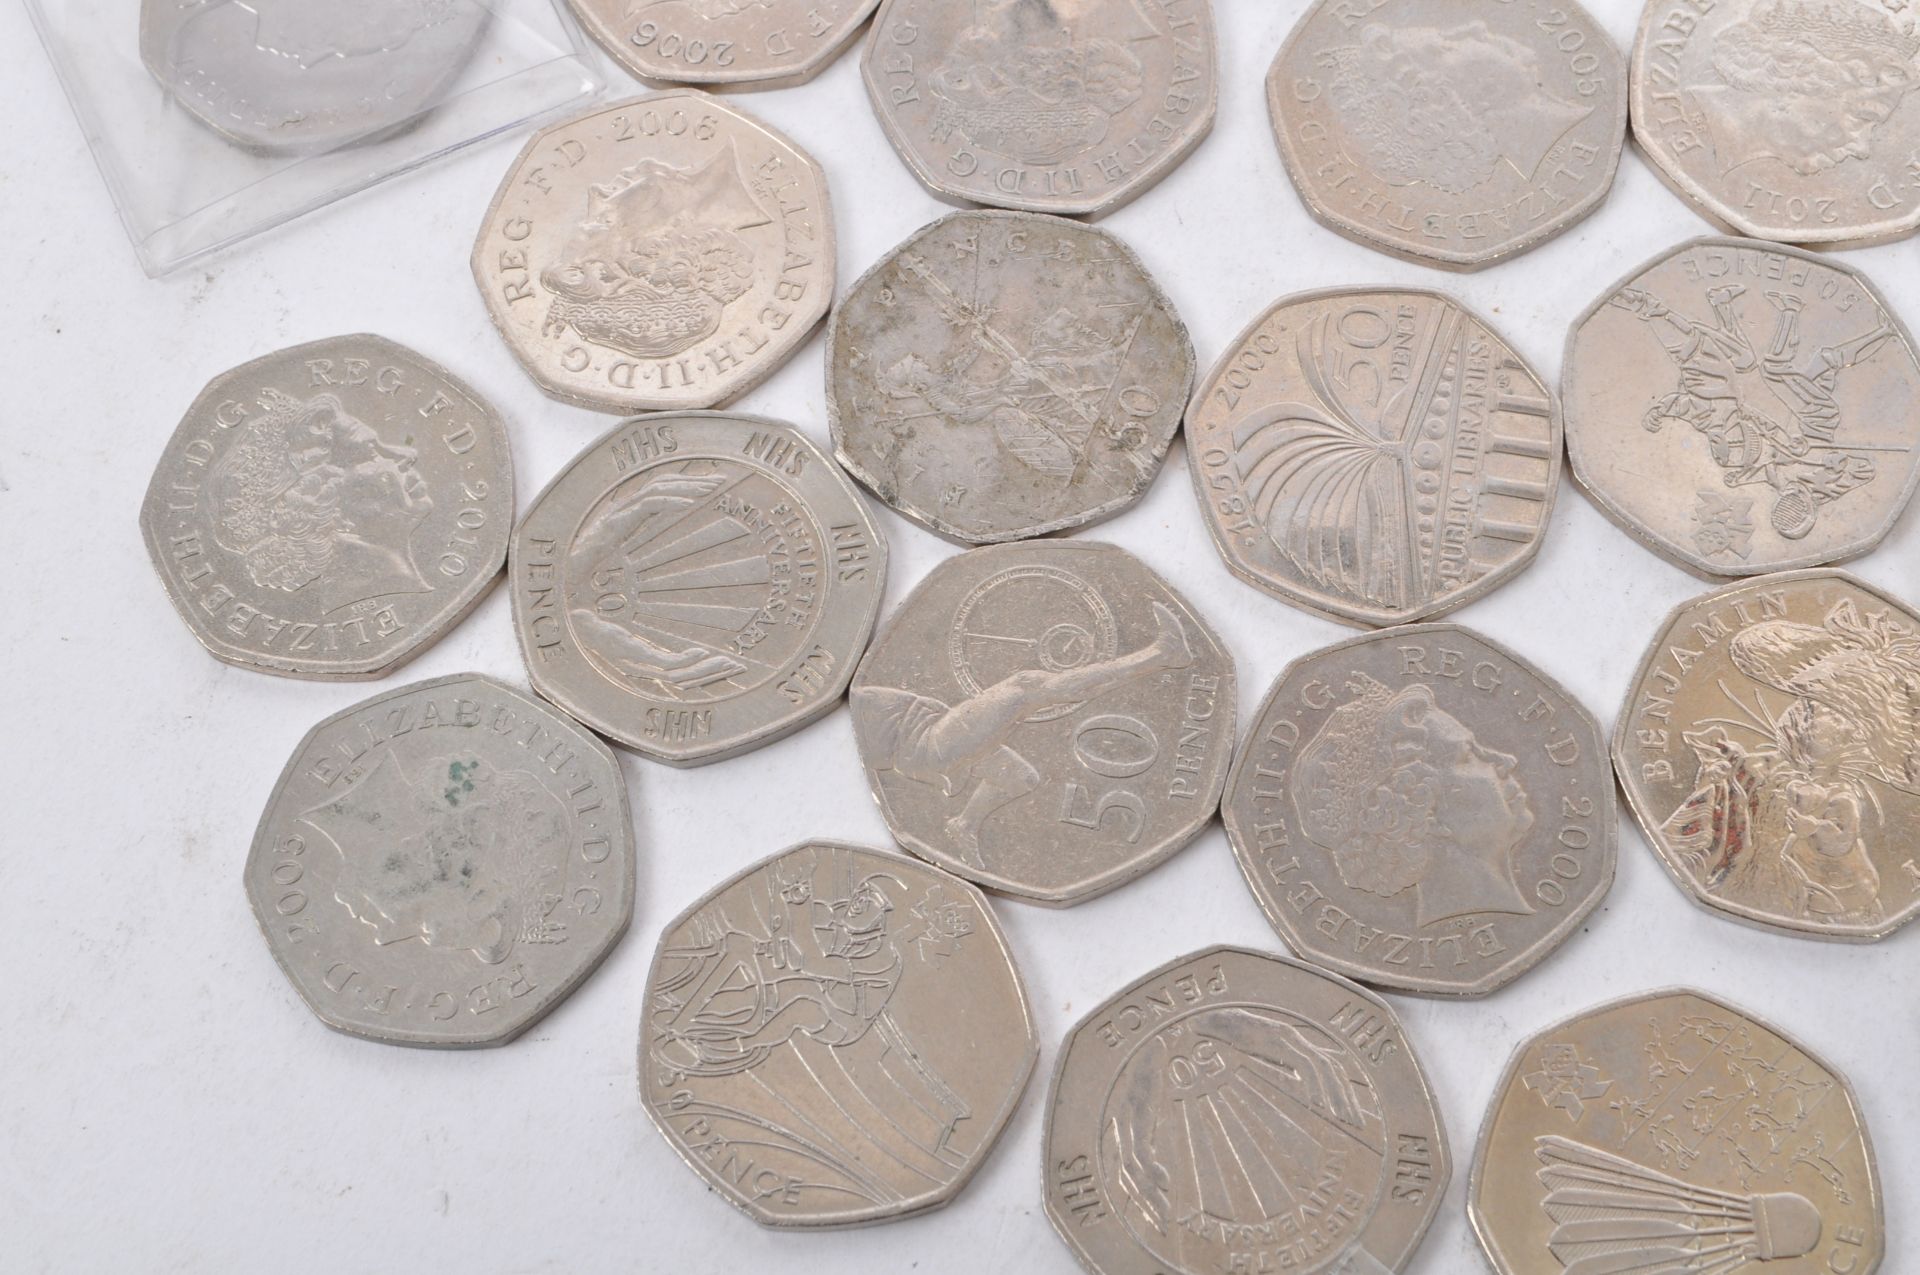 COLLETION OF UNITED KINGDOM CIRCULATED CURRENCY COINAGE - Image 3 of 9